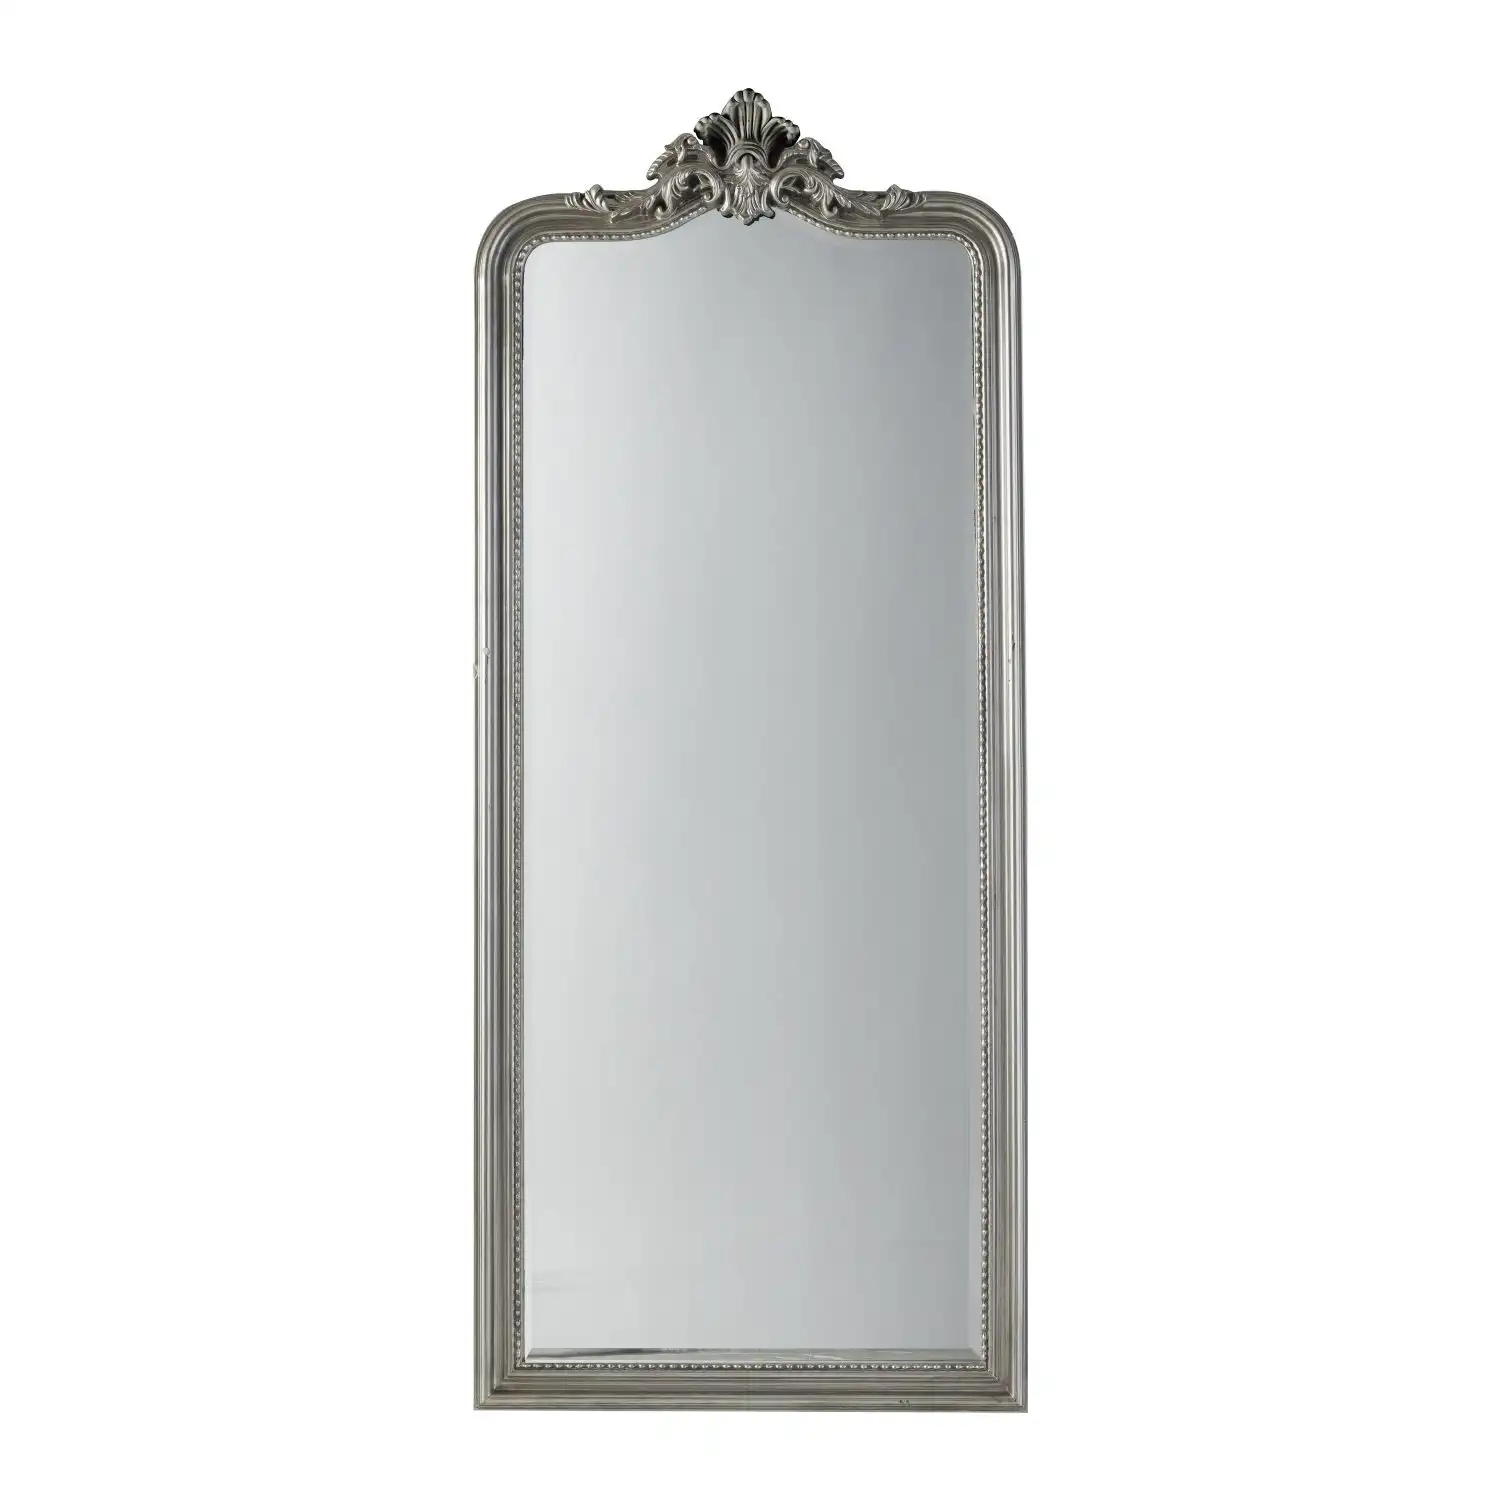 French Style Tall Full Length Embellished Crown Ornate Silver Mirror